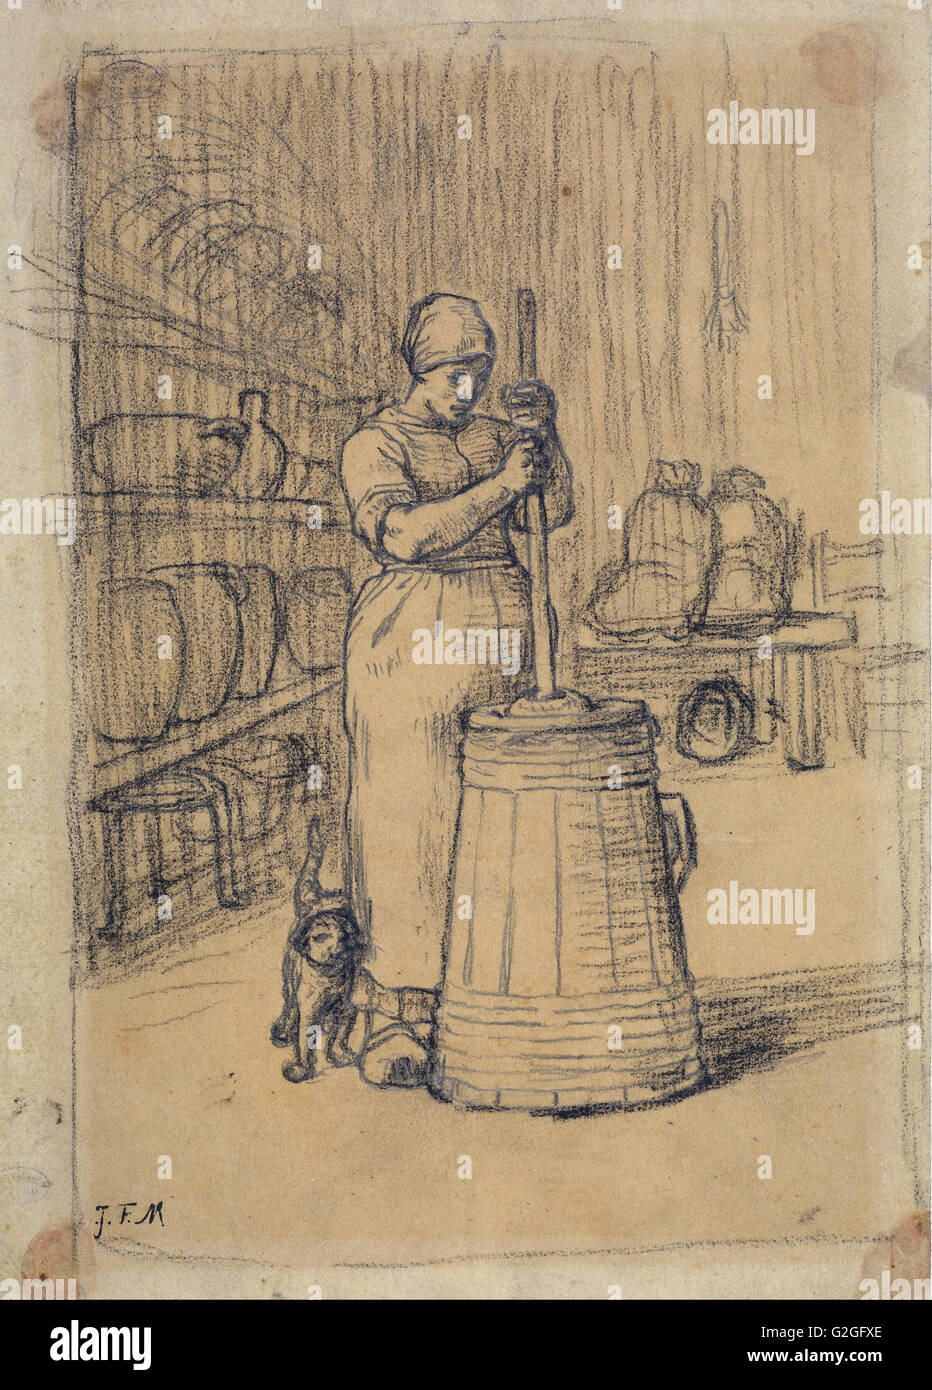 Jean-François Millet - Study for Woman Churning Butter - Museum of Fine Arts, Boston Stock Photo